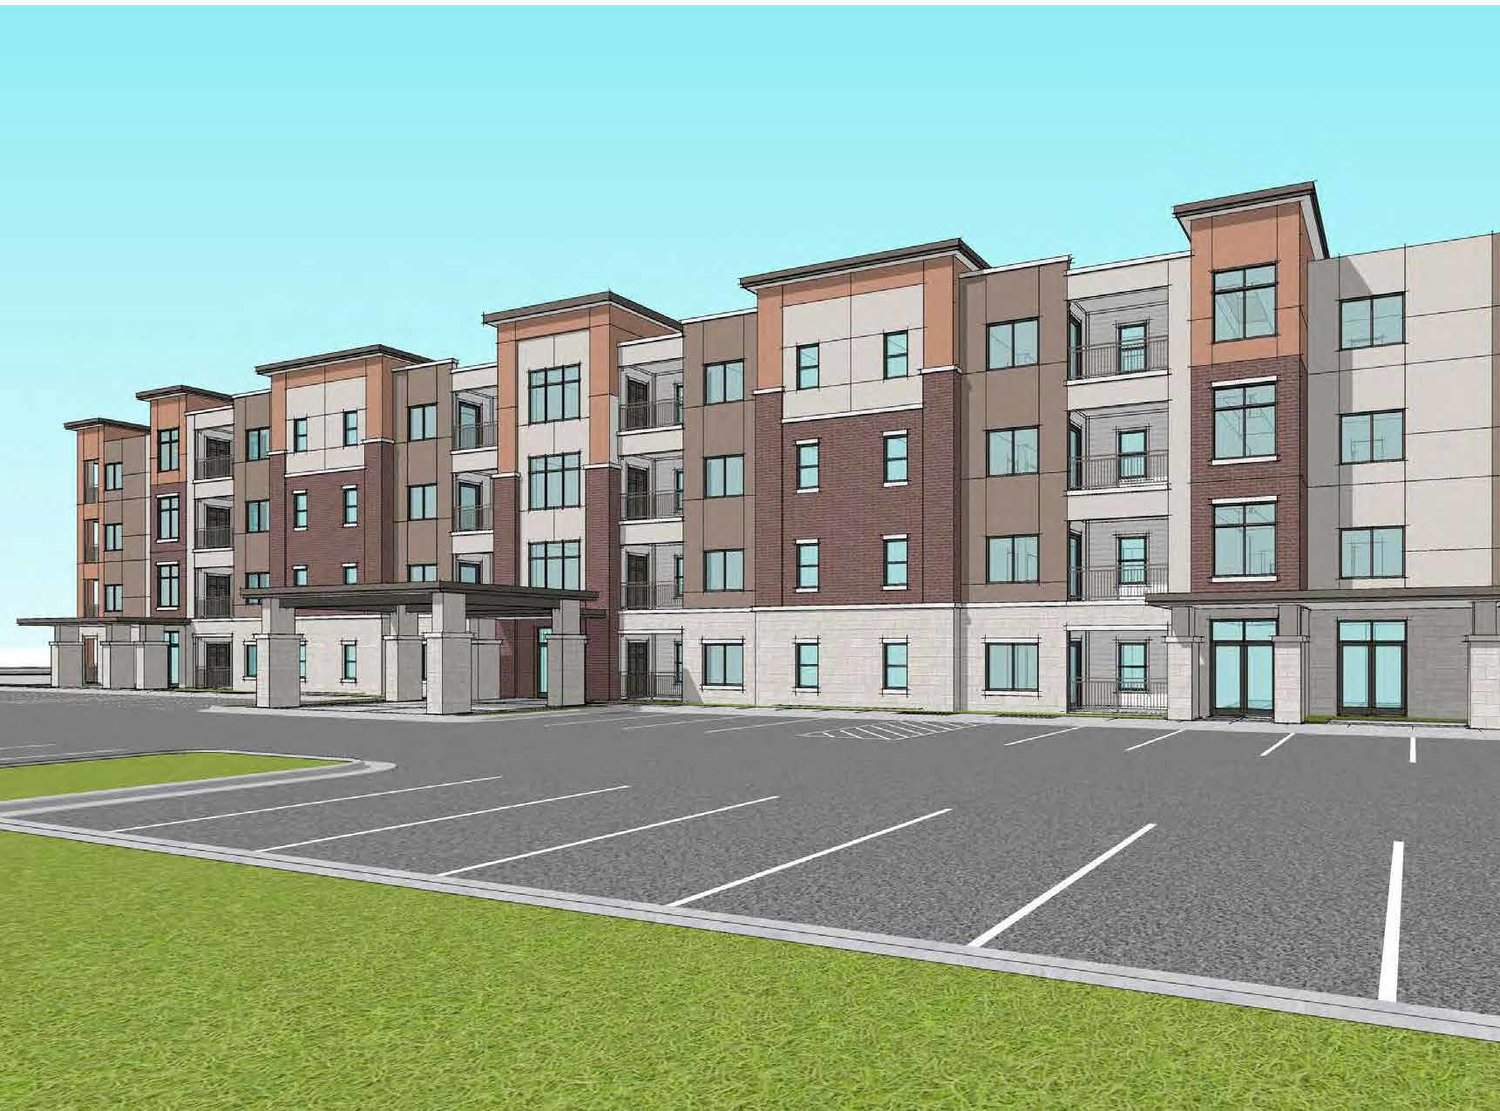 The $16.1 million Promenade Commons residential community is slated for completion in 2021.